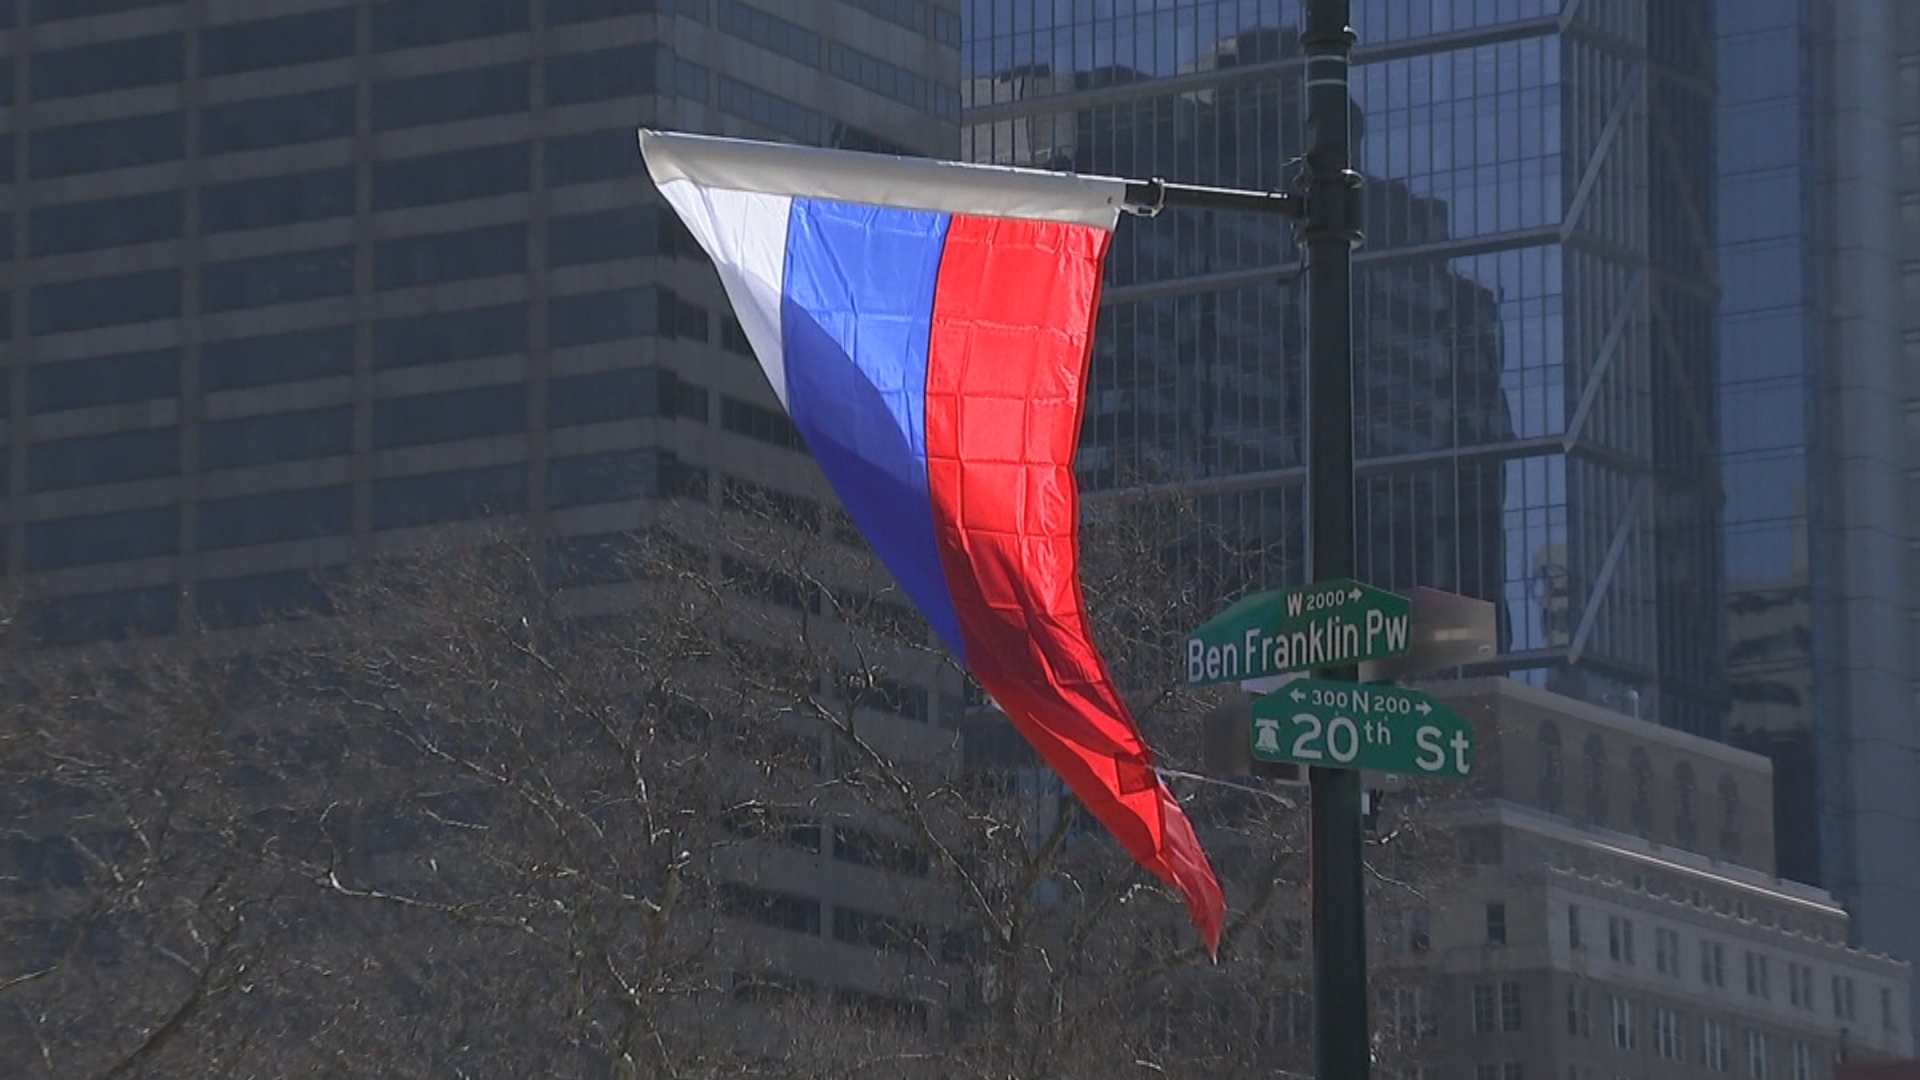 The Russian flag keeps getting stolen from the parkway. Now there's a  petition to officially remove it.